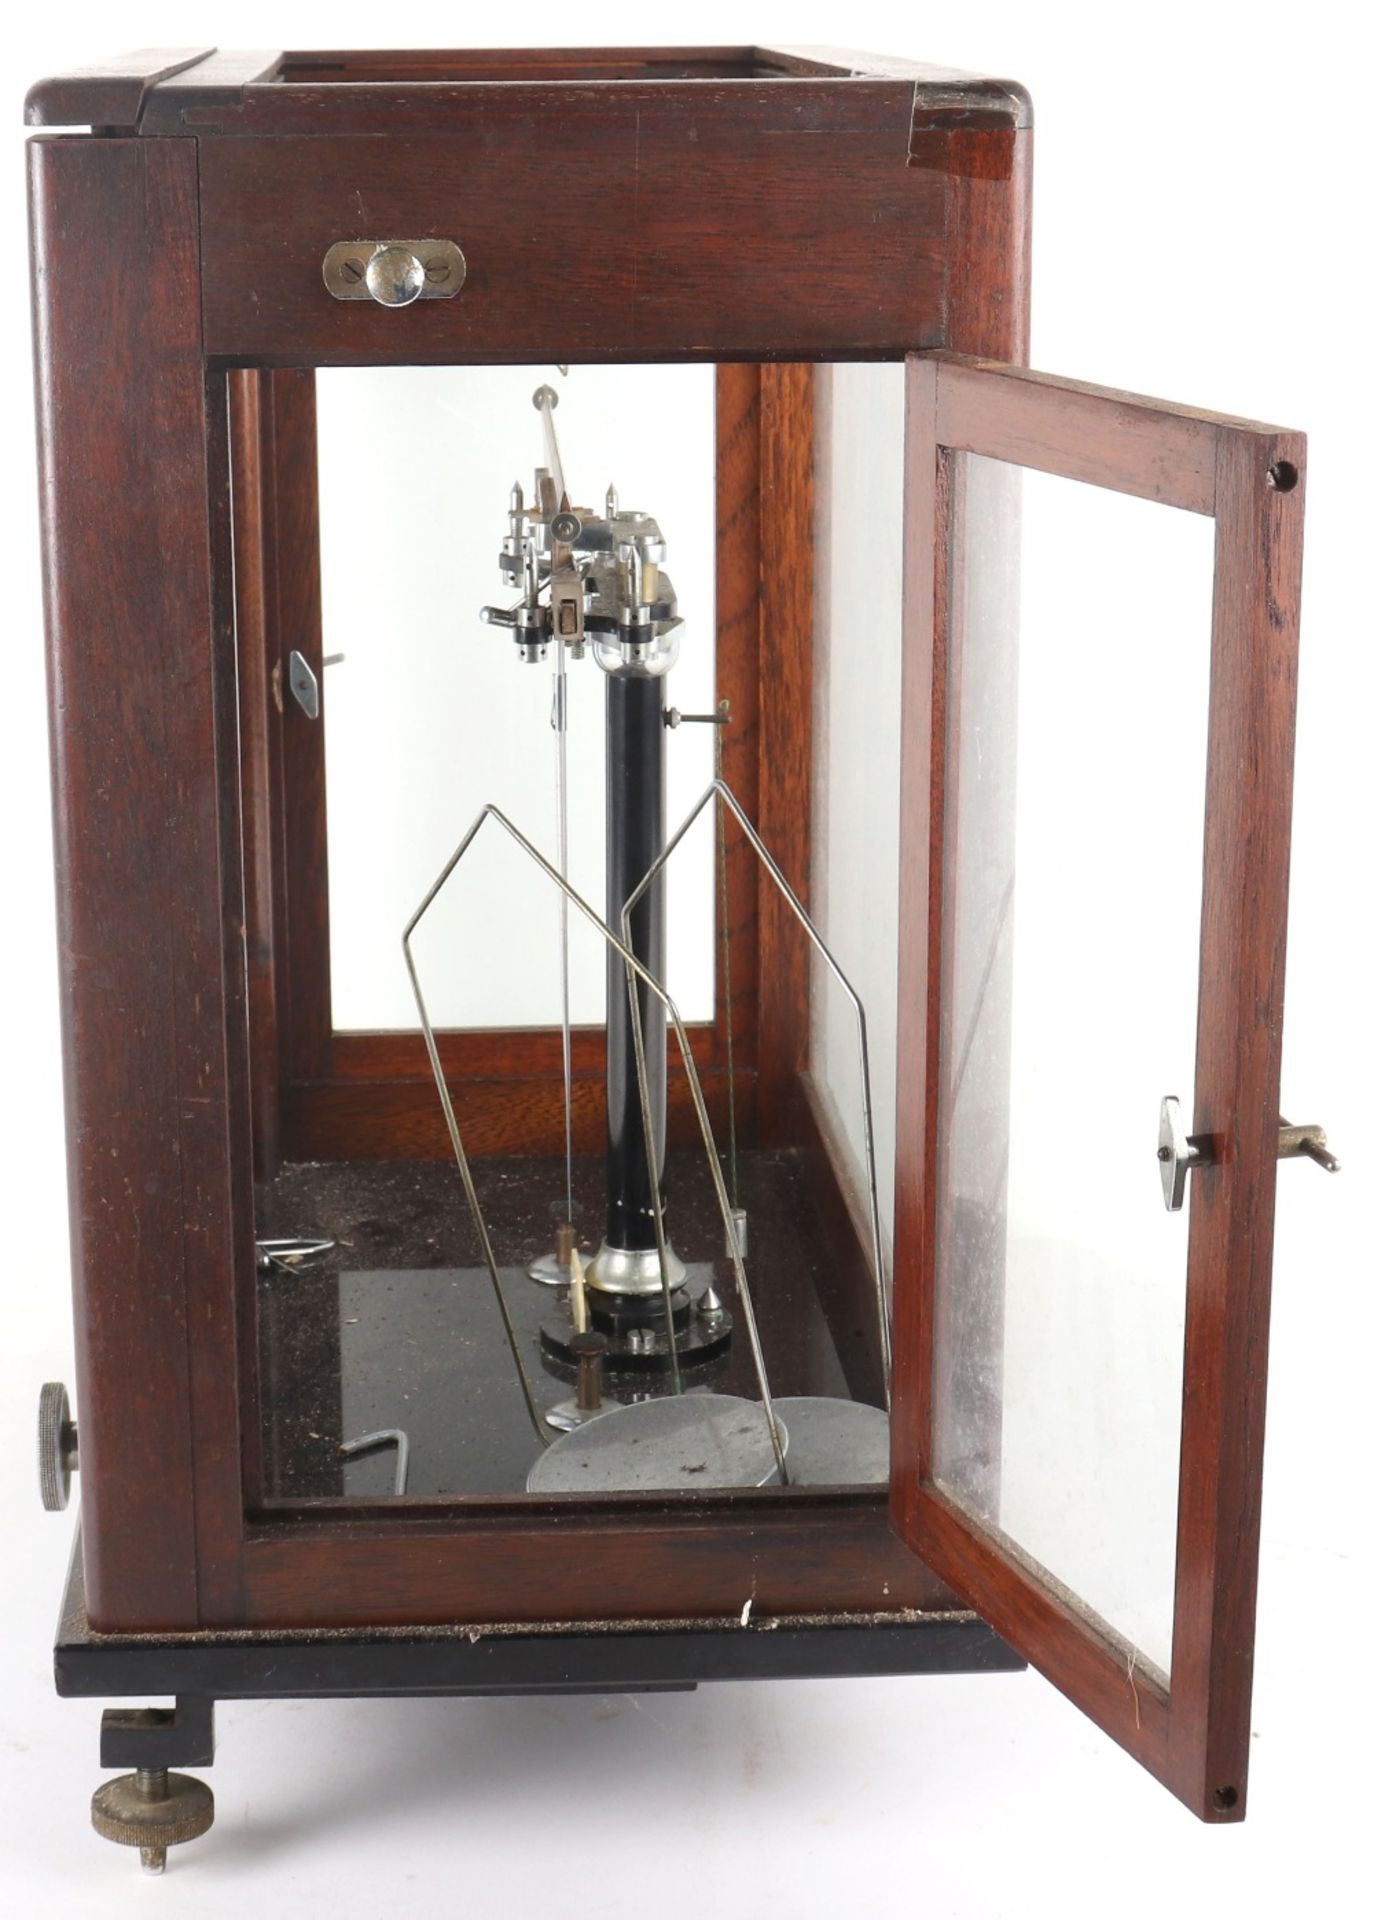 A Townson & Mercer set of scales, in glass, oak and mahogany case - Image 6 of 10